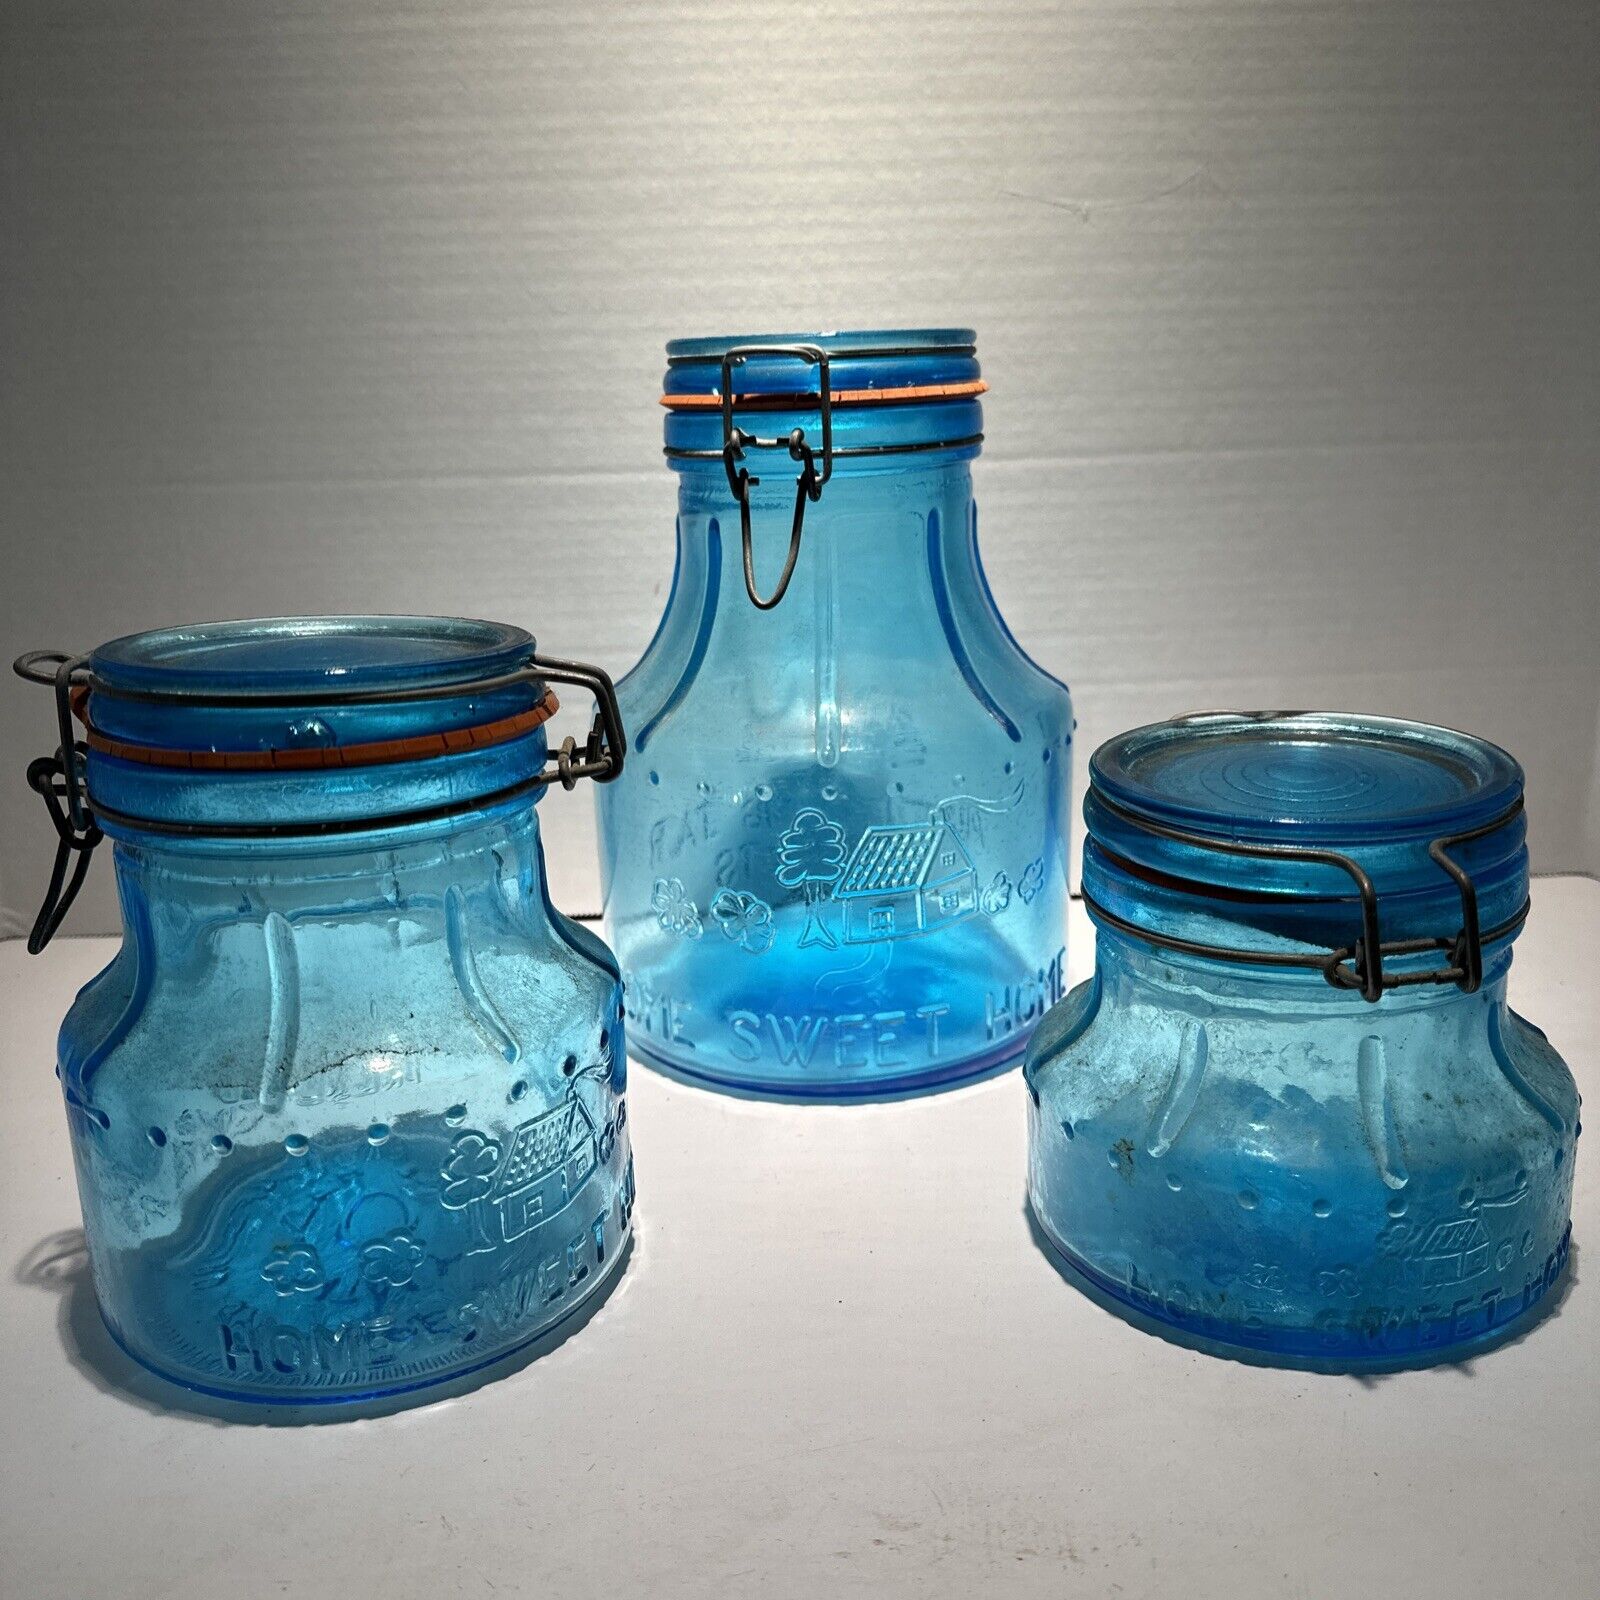 3 VINTAGE Crownford Giftware Blue Glass Jar Canister Home Sweet Home Italy